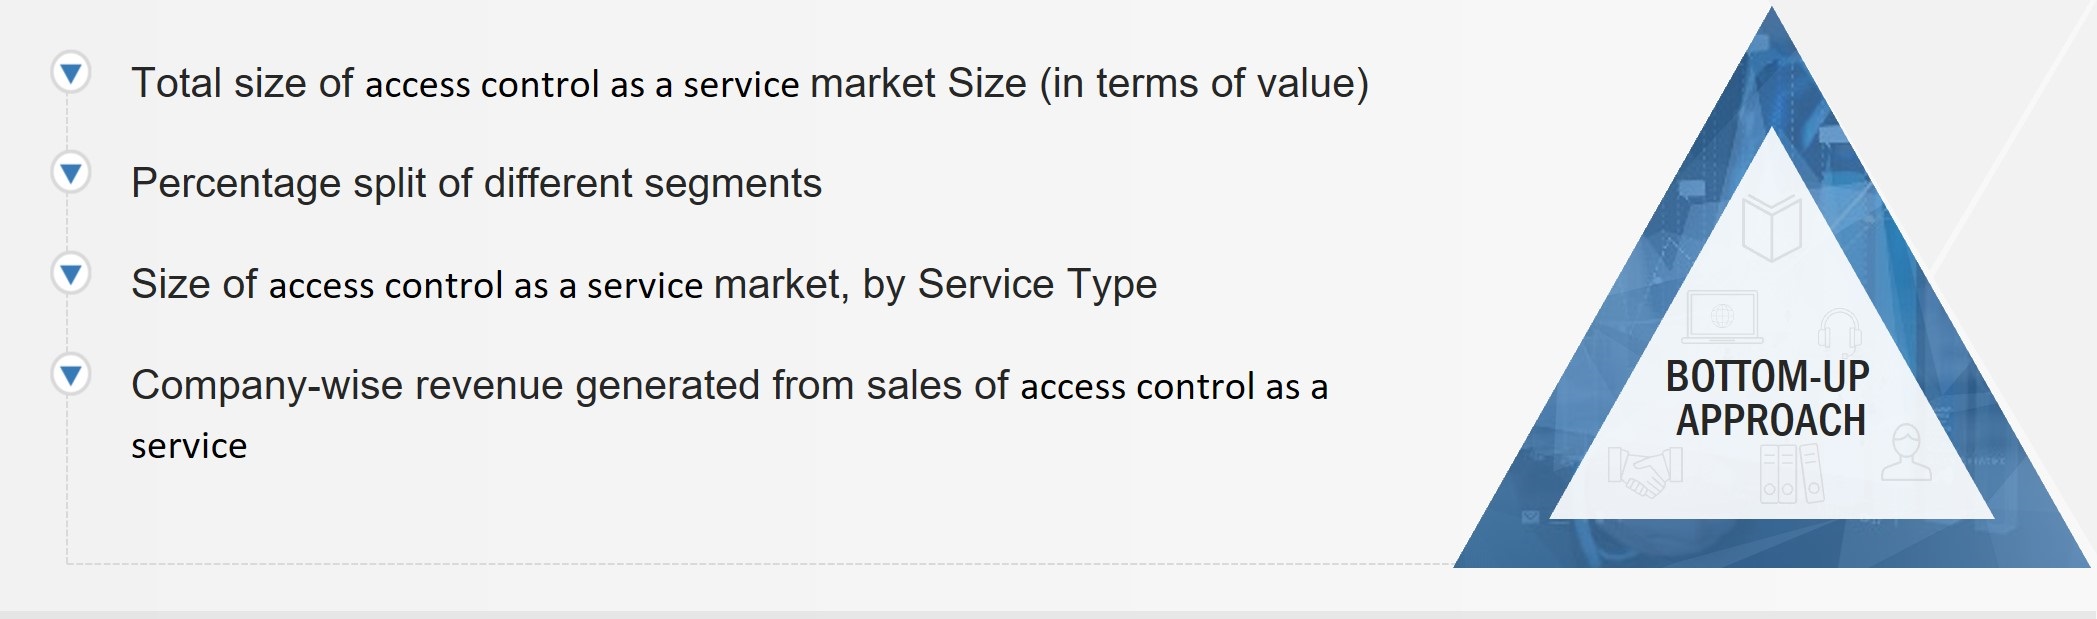 Access Control as a Service Market Bottom-Up Approach, and Share 